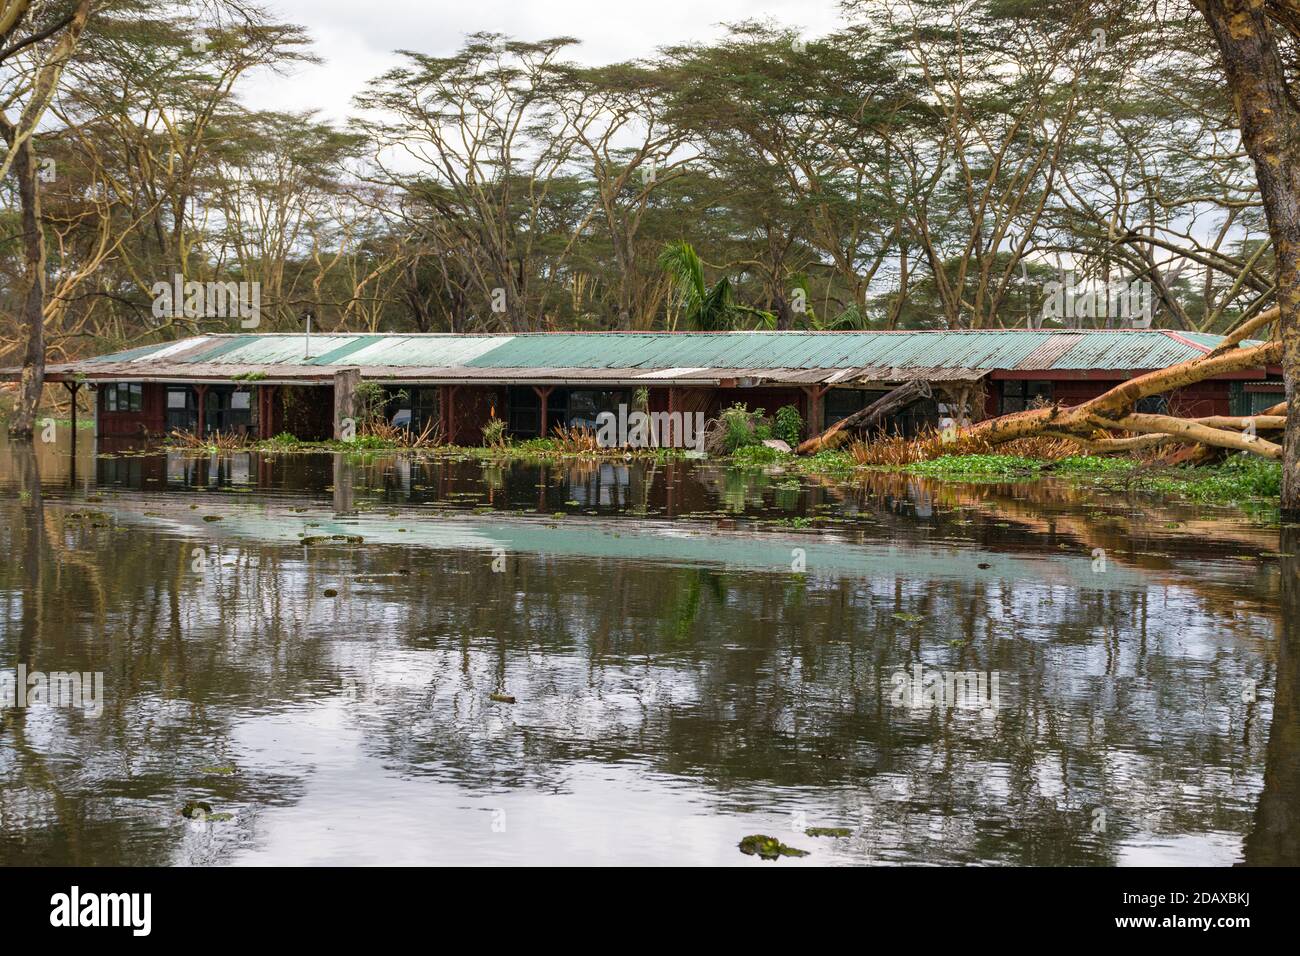 Several buildings partially submerged due to rising water levels, lake Naivasha, Kenya, East Africa Stock Photo